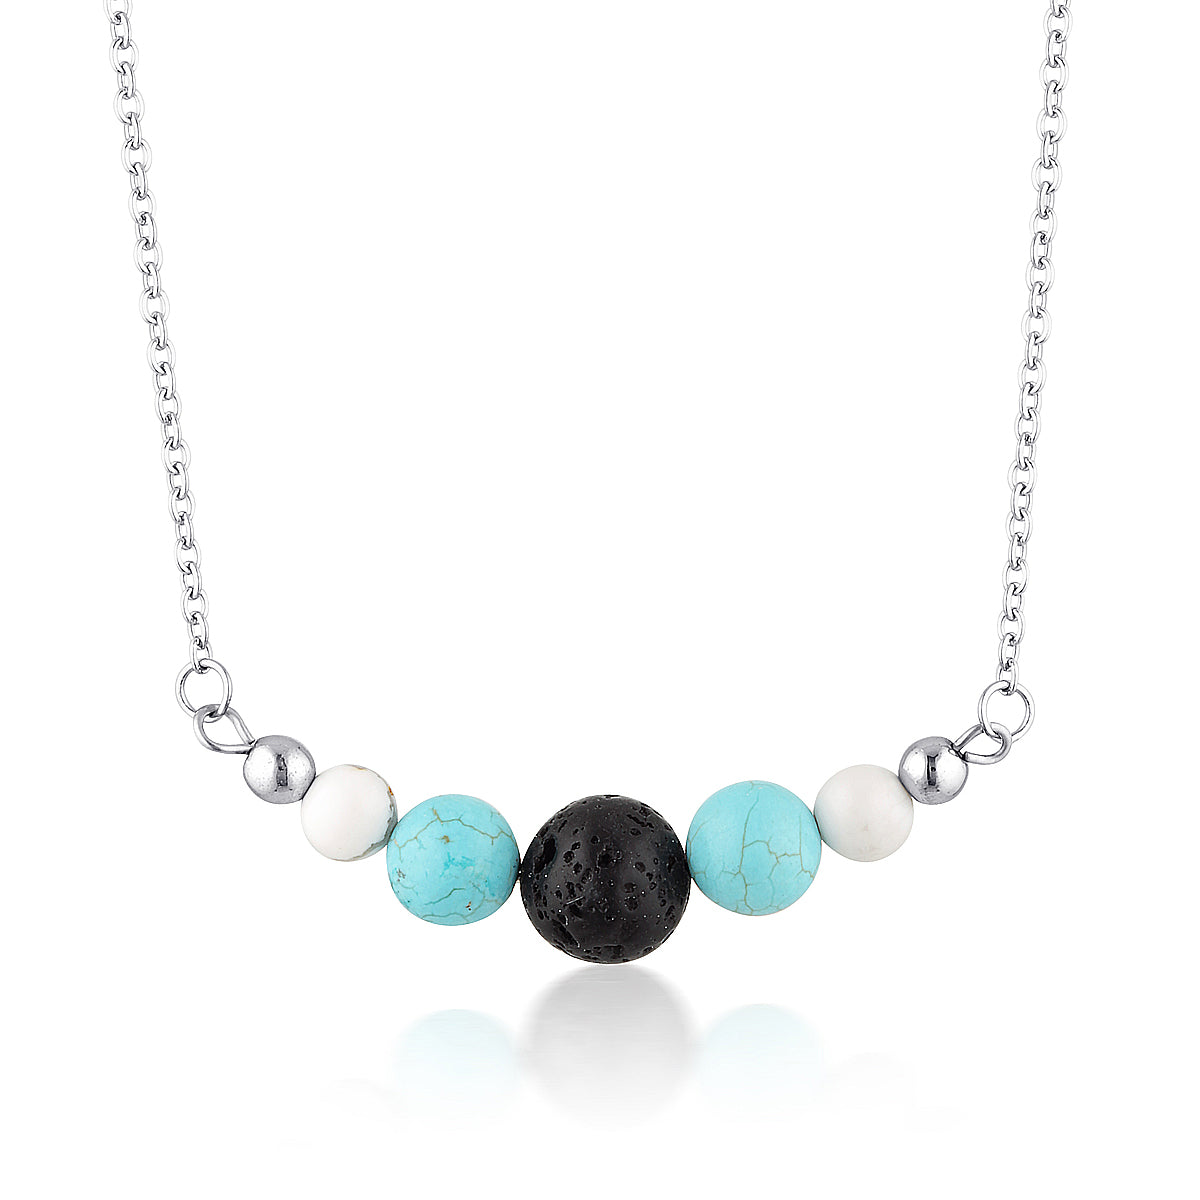 Howlite & Turquoise essential oil diffuser necklace